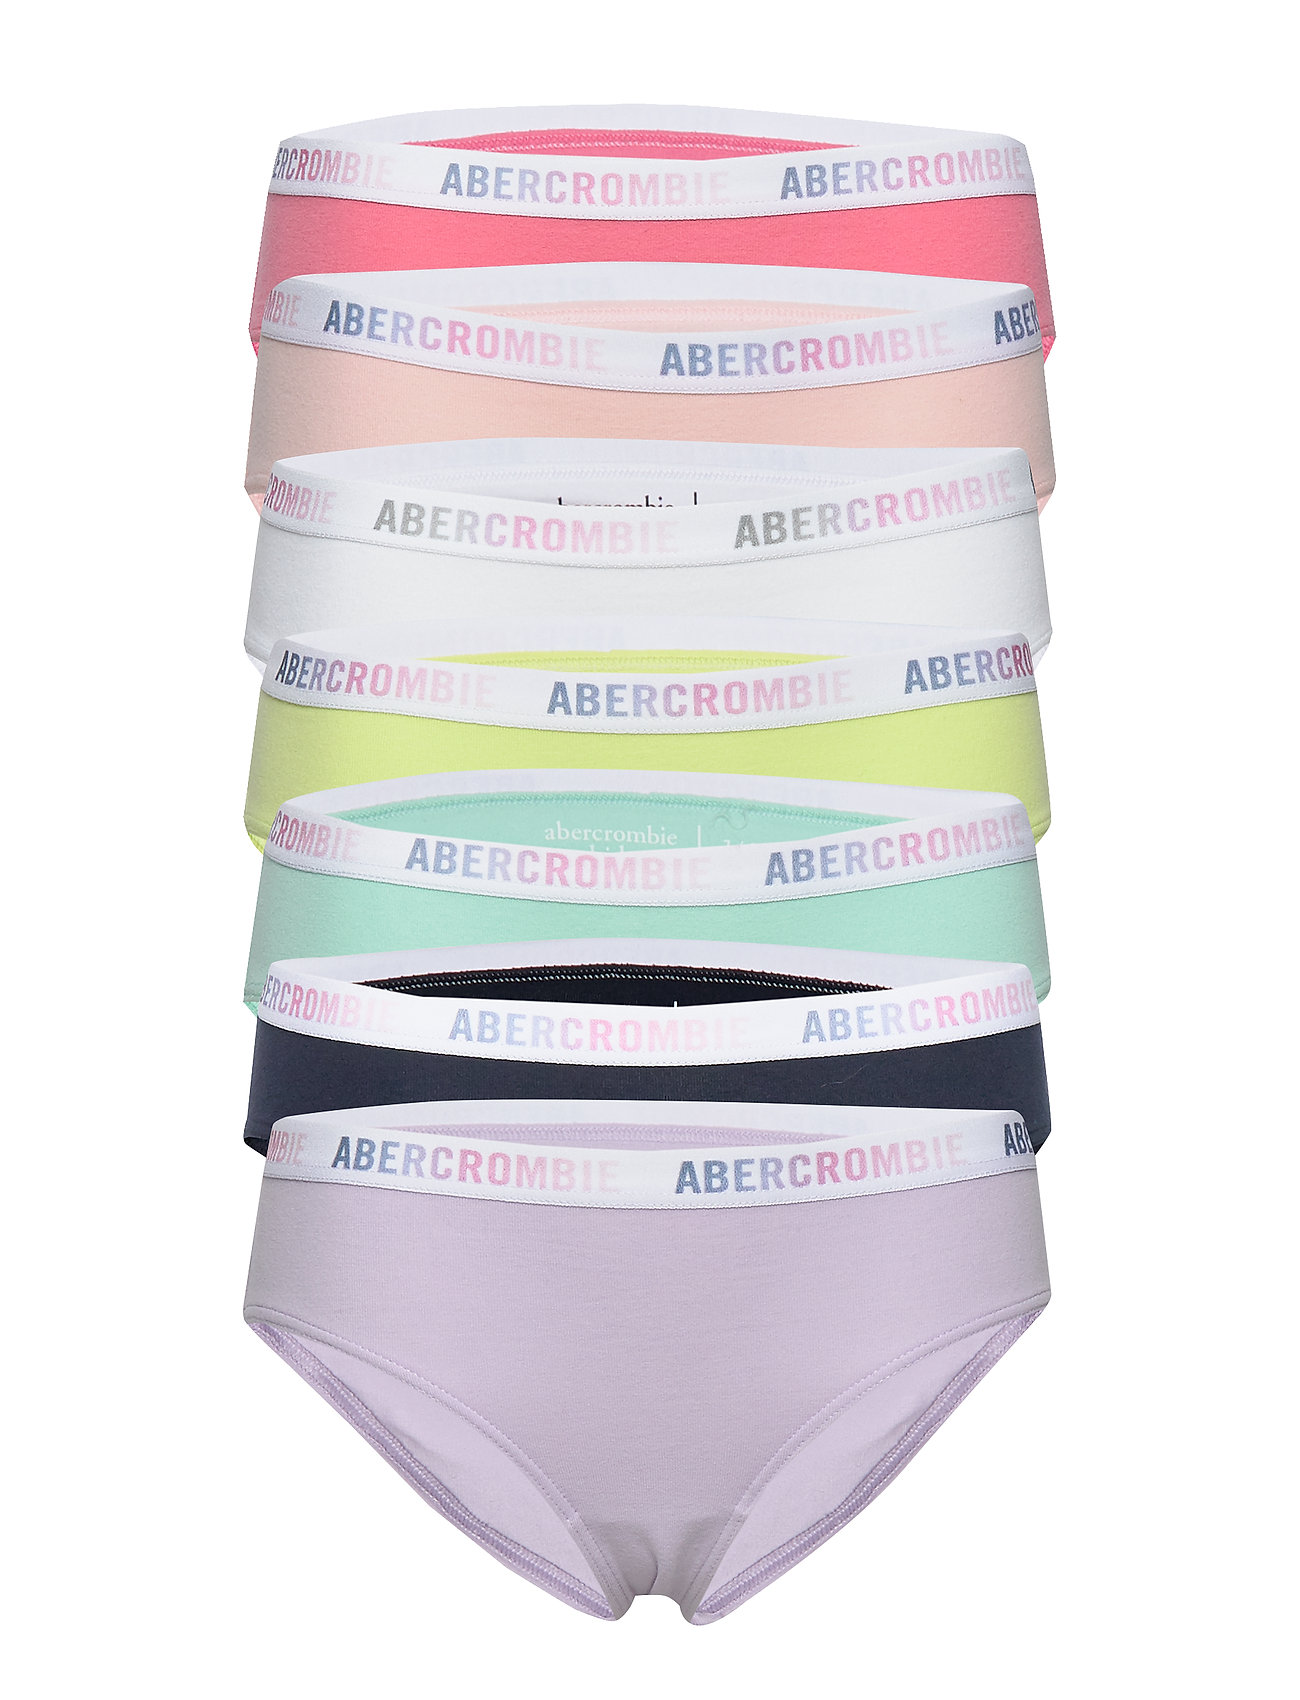 abercrombie and fitch panties